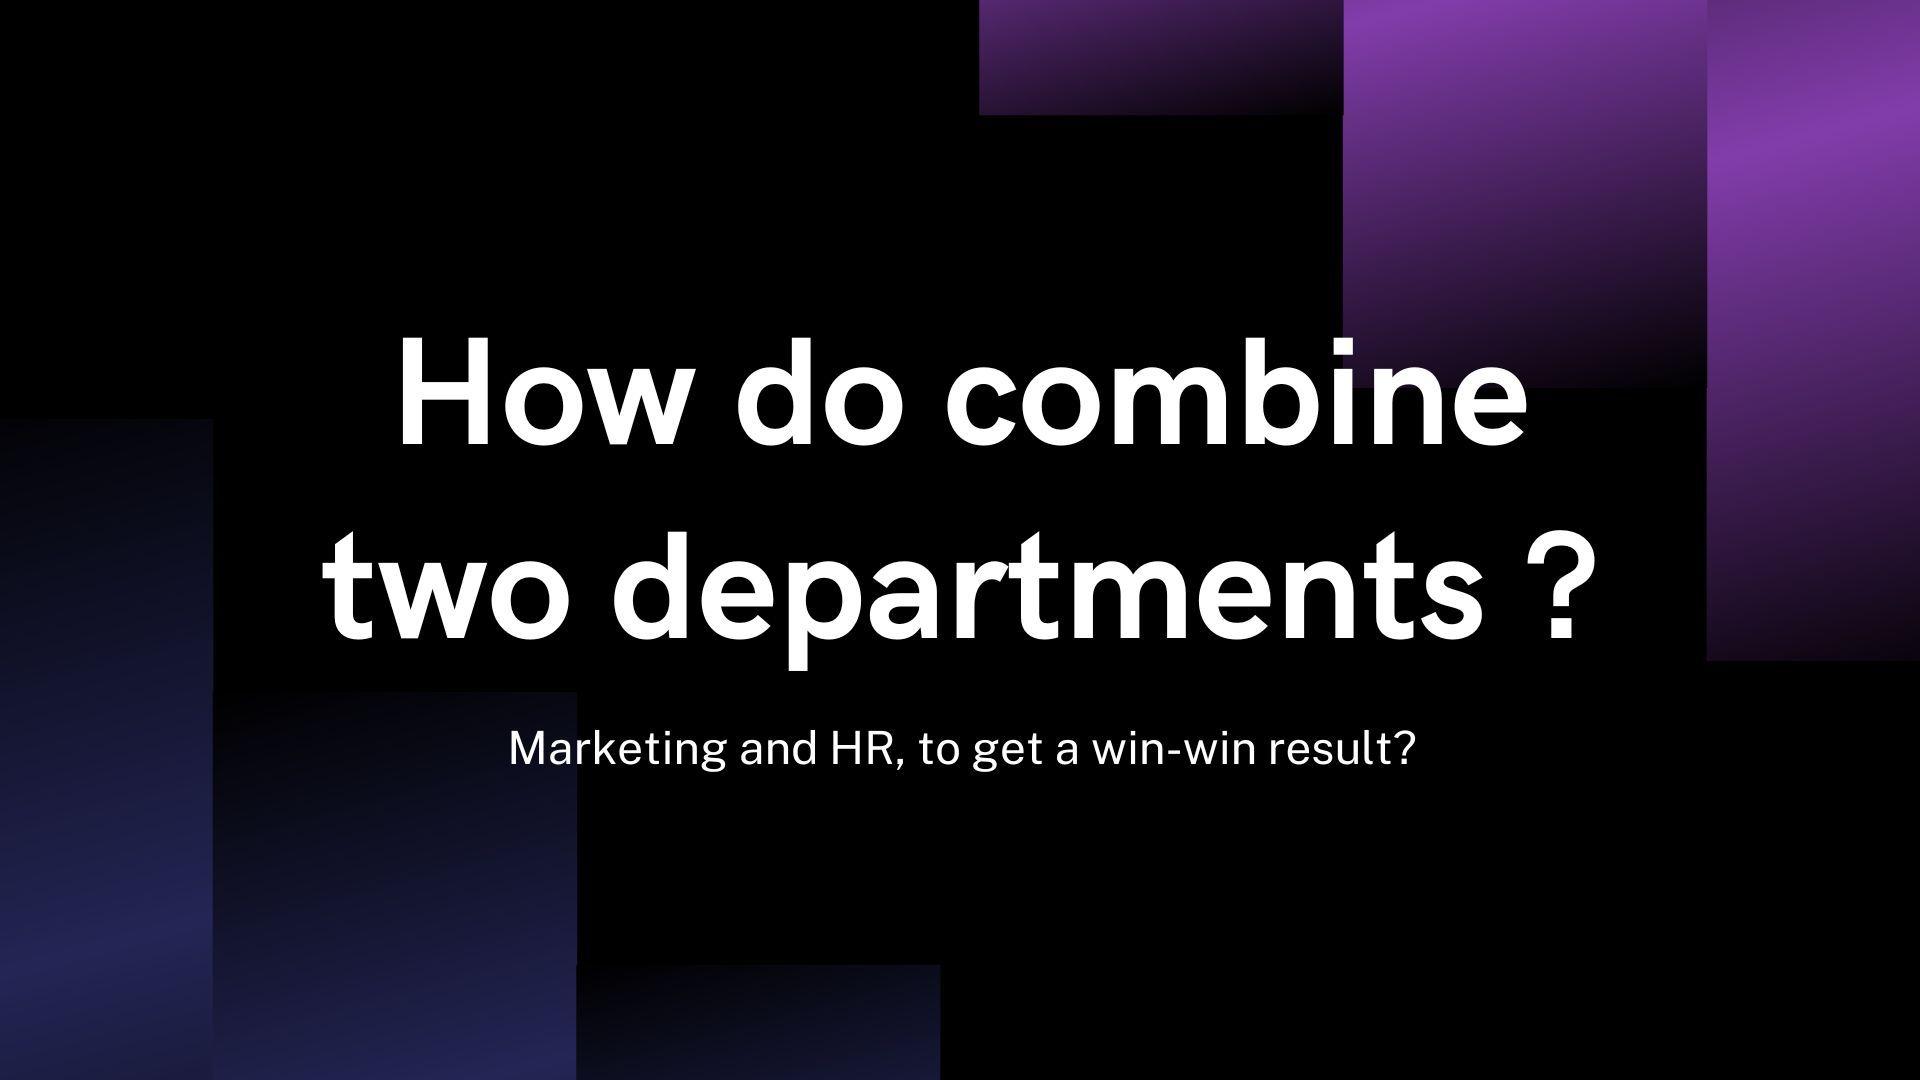 How to combine two departments — marketing and HR to get a win-win result?